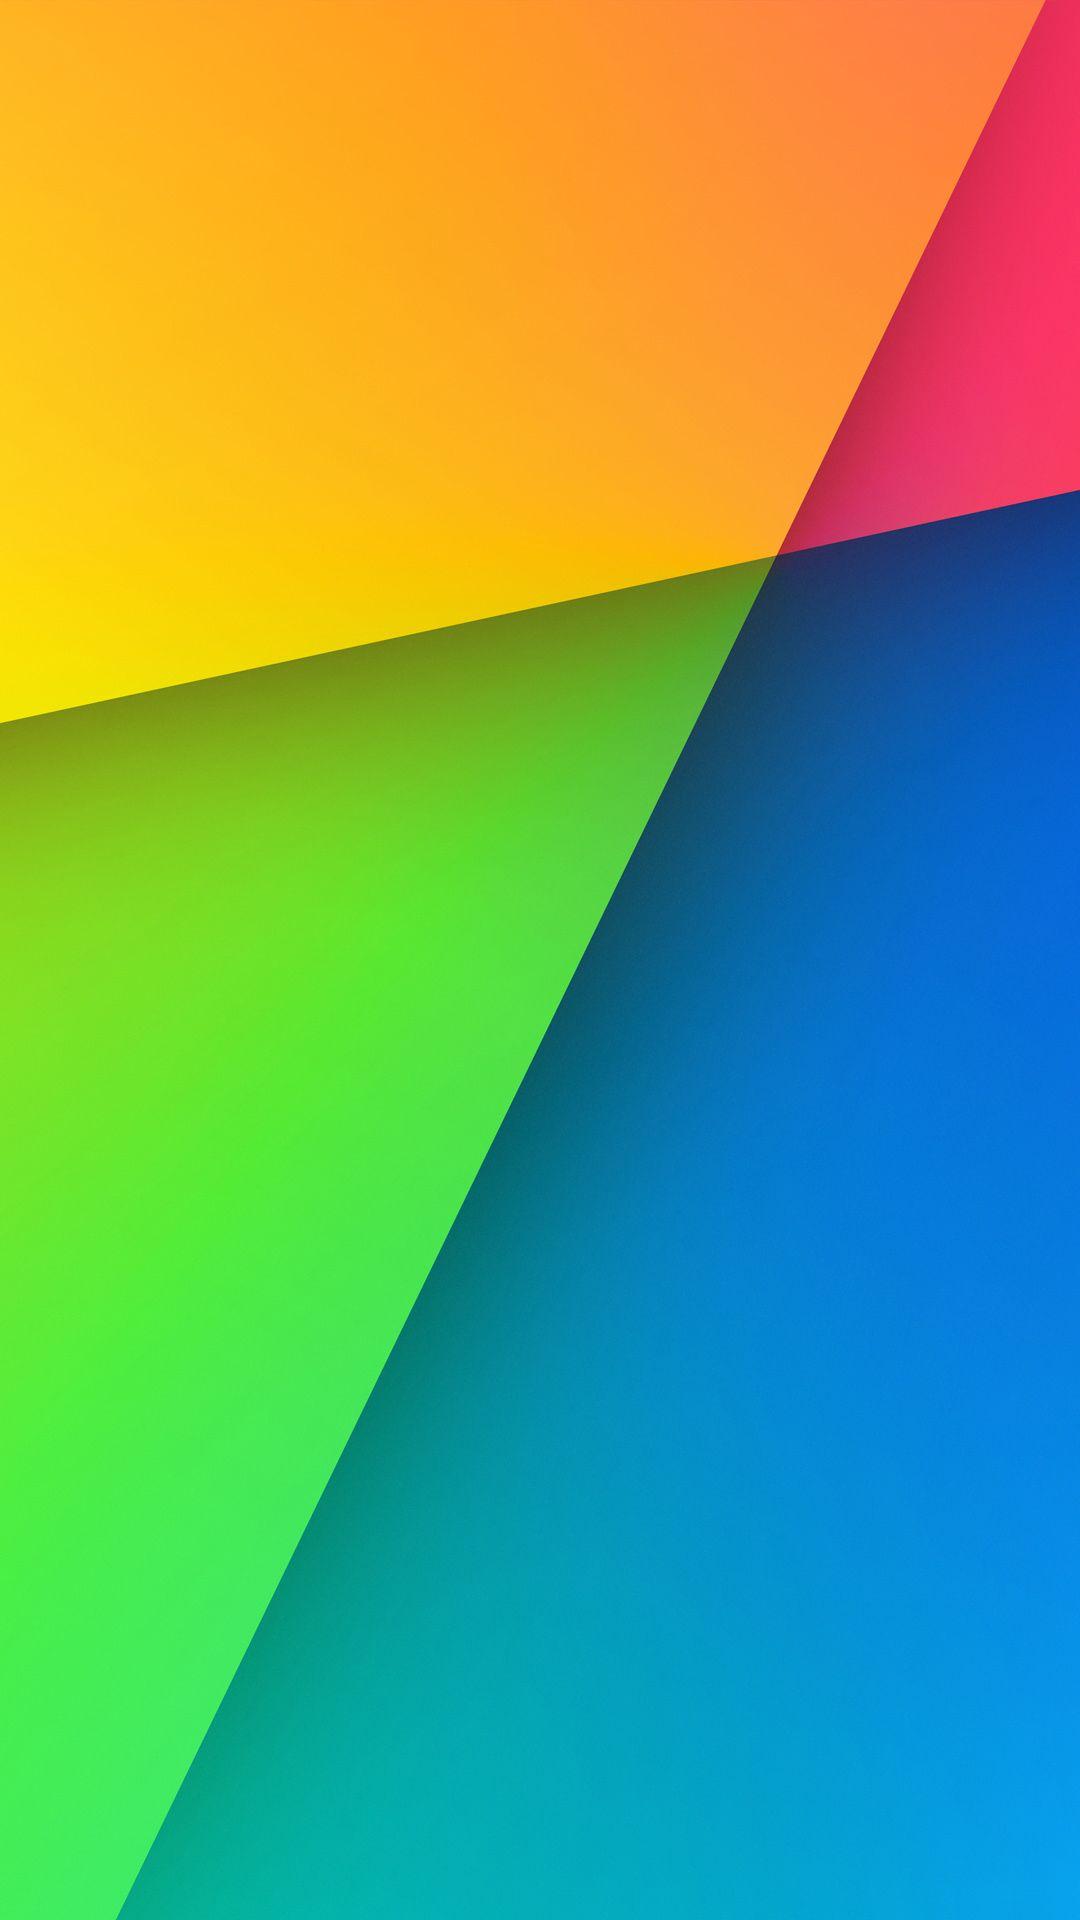 Nexus 7 Official HD Wallpaper Android Wallpaper free download